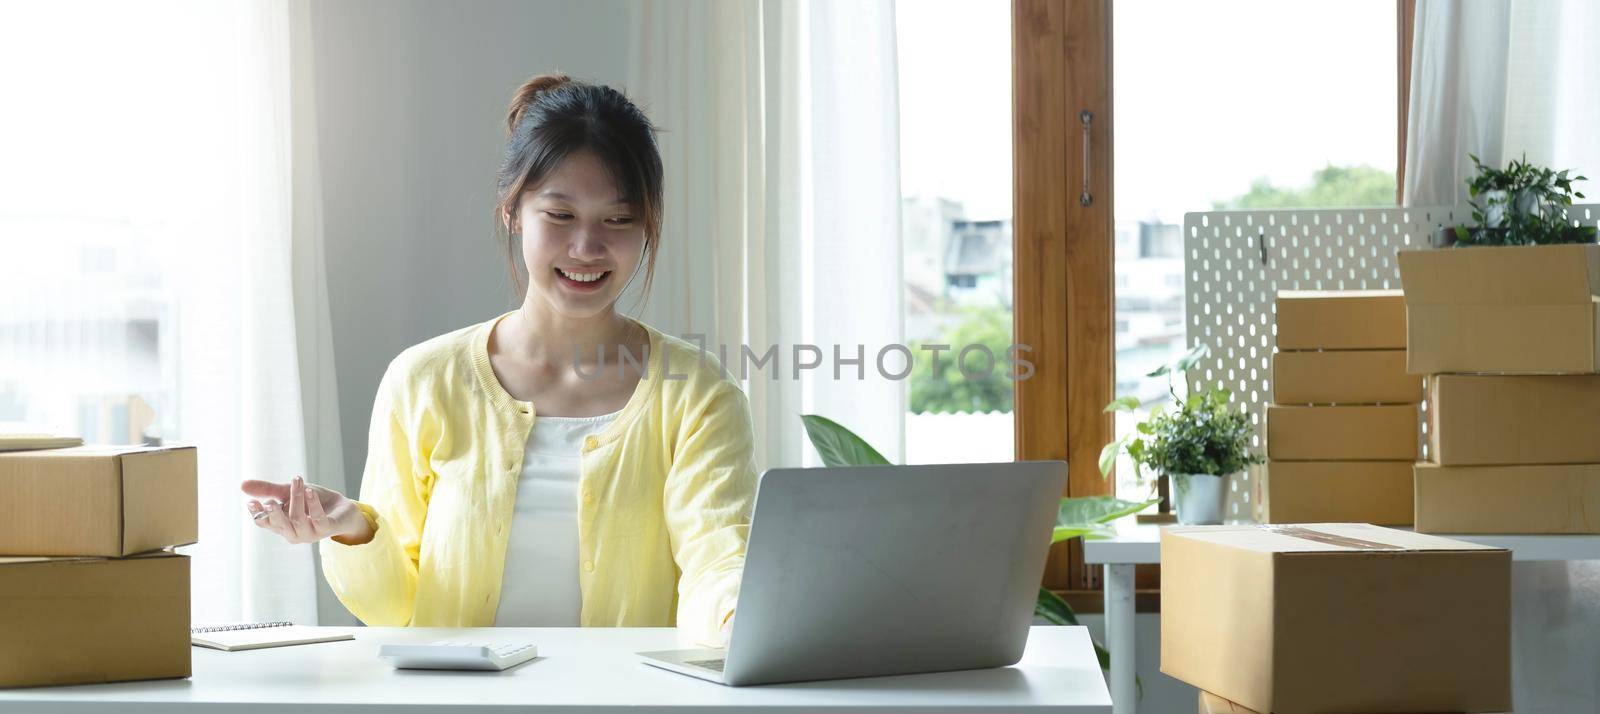 A portrait of Asian woman, e-commerce employee sitting in the office full of packages on the table using a laptop and calculator, for SME business, e-commerce, technology and delivery business. by wichayada